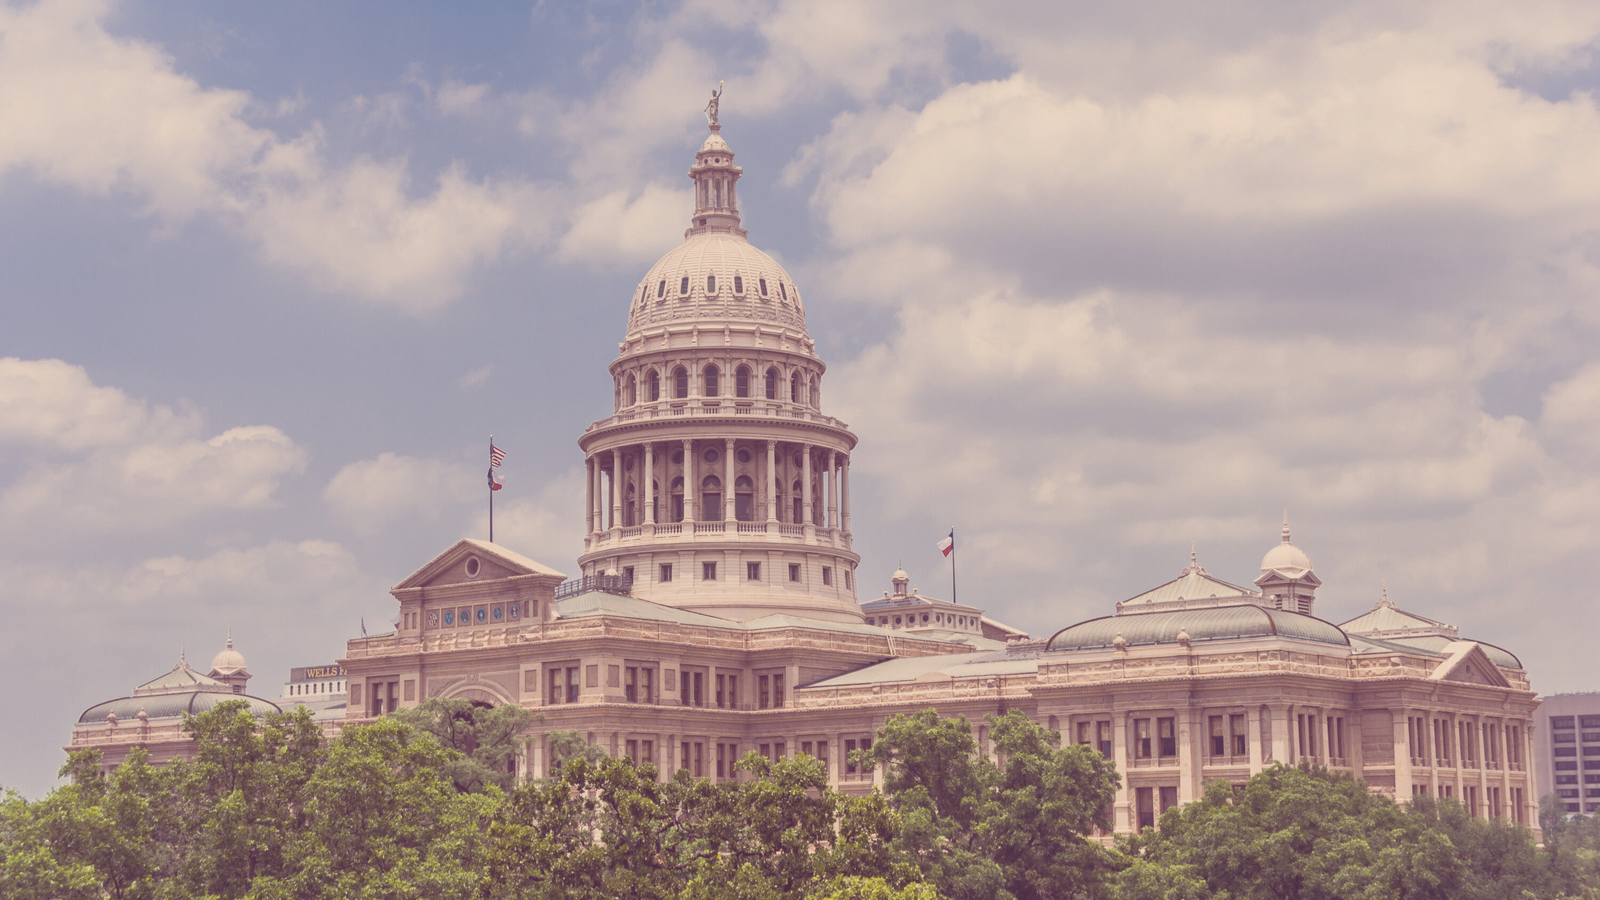 The pink granite dome and main building of the Texas State Capitol, home of the Texas legislature. It's scene under a partly cloudy sky from behind tall green trees. There is a color filter addede to give it a washed out, old timey photograph feel.